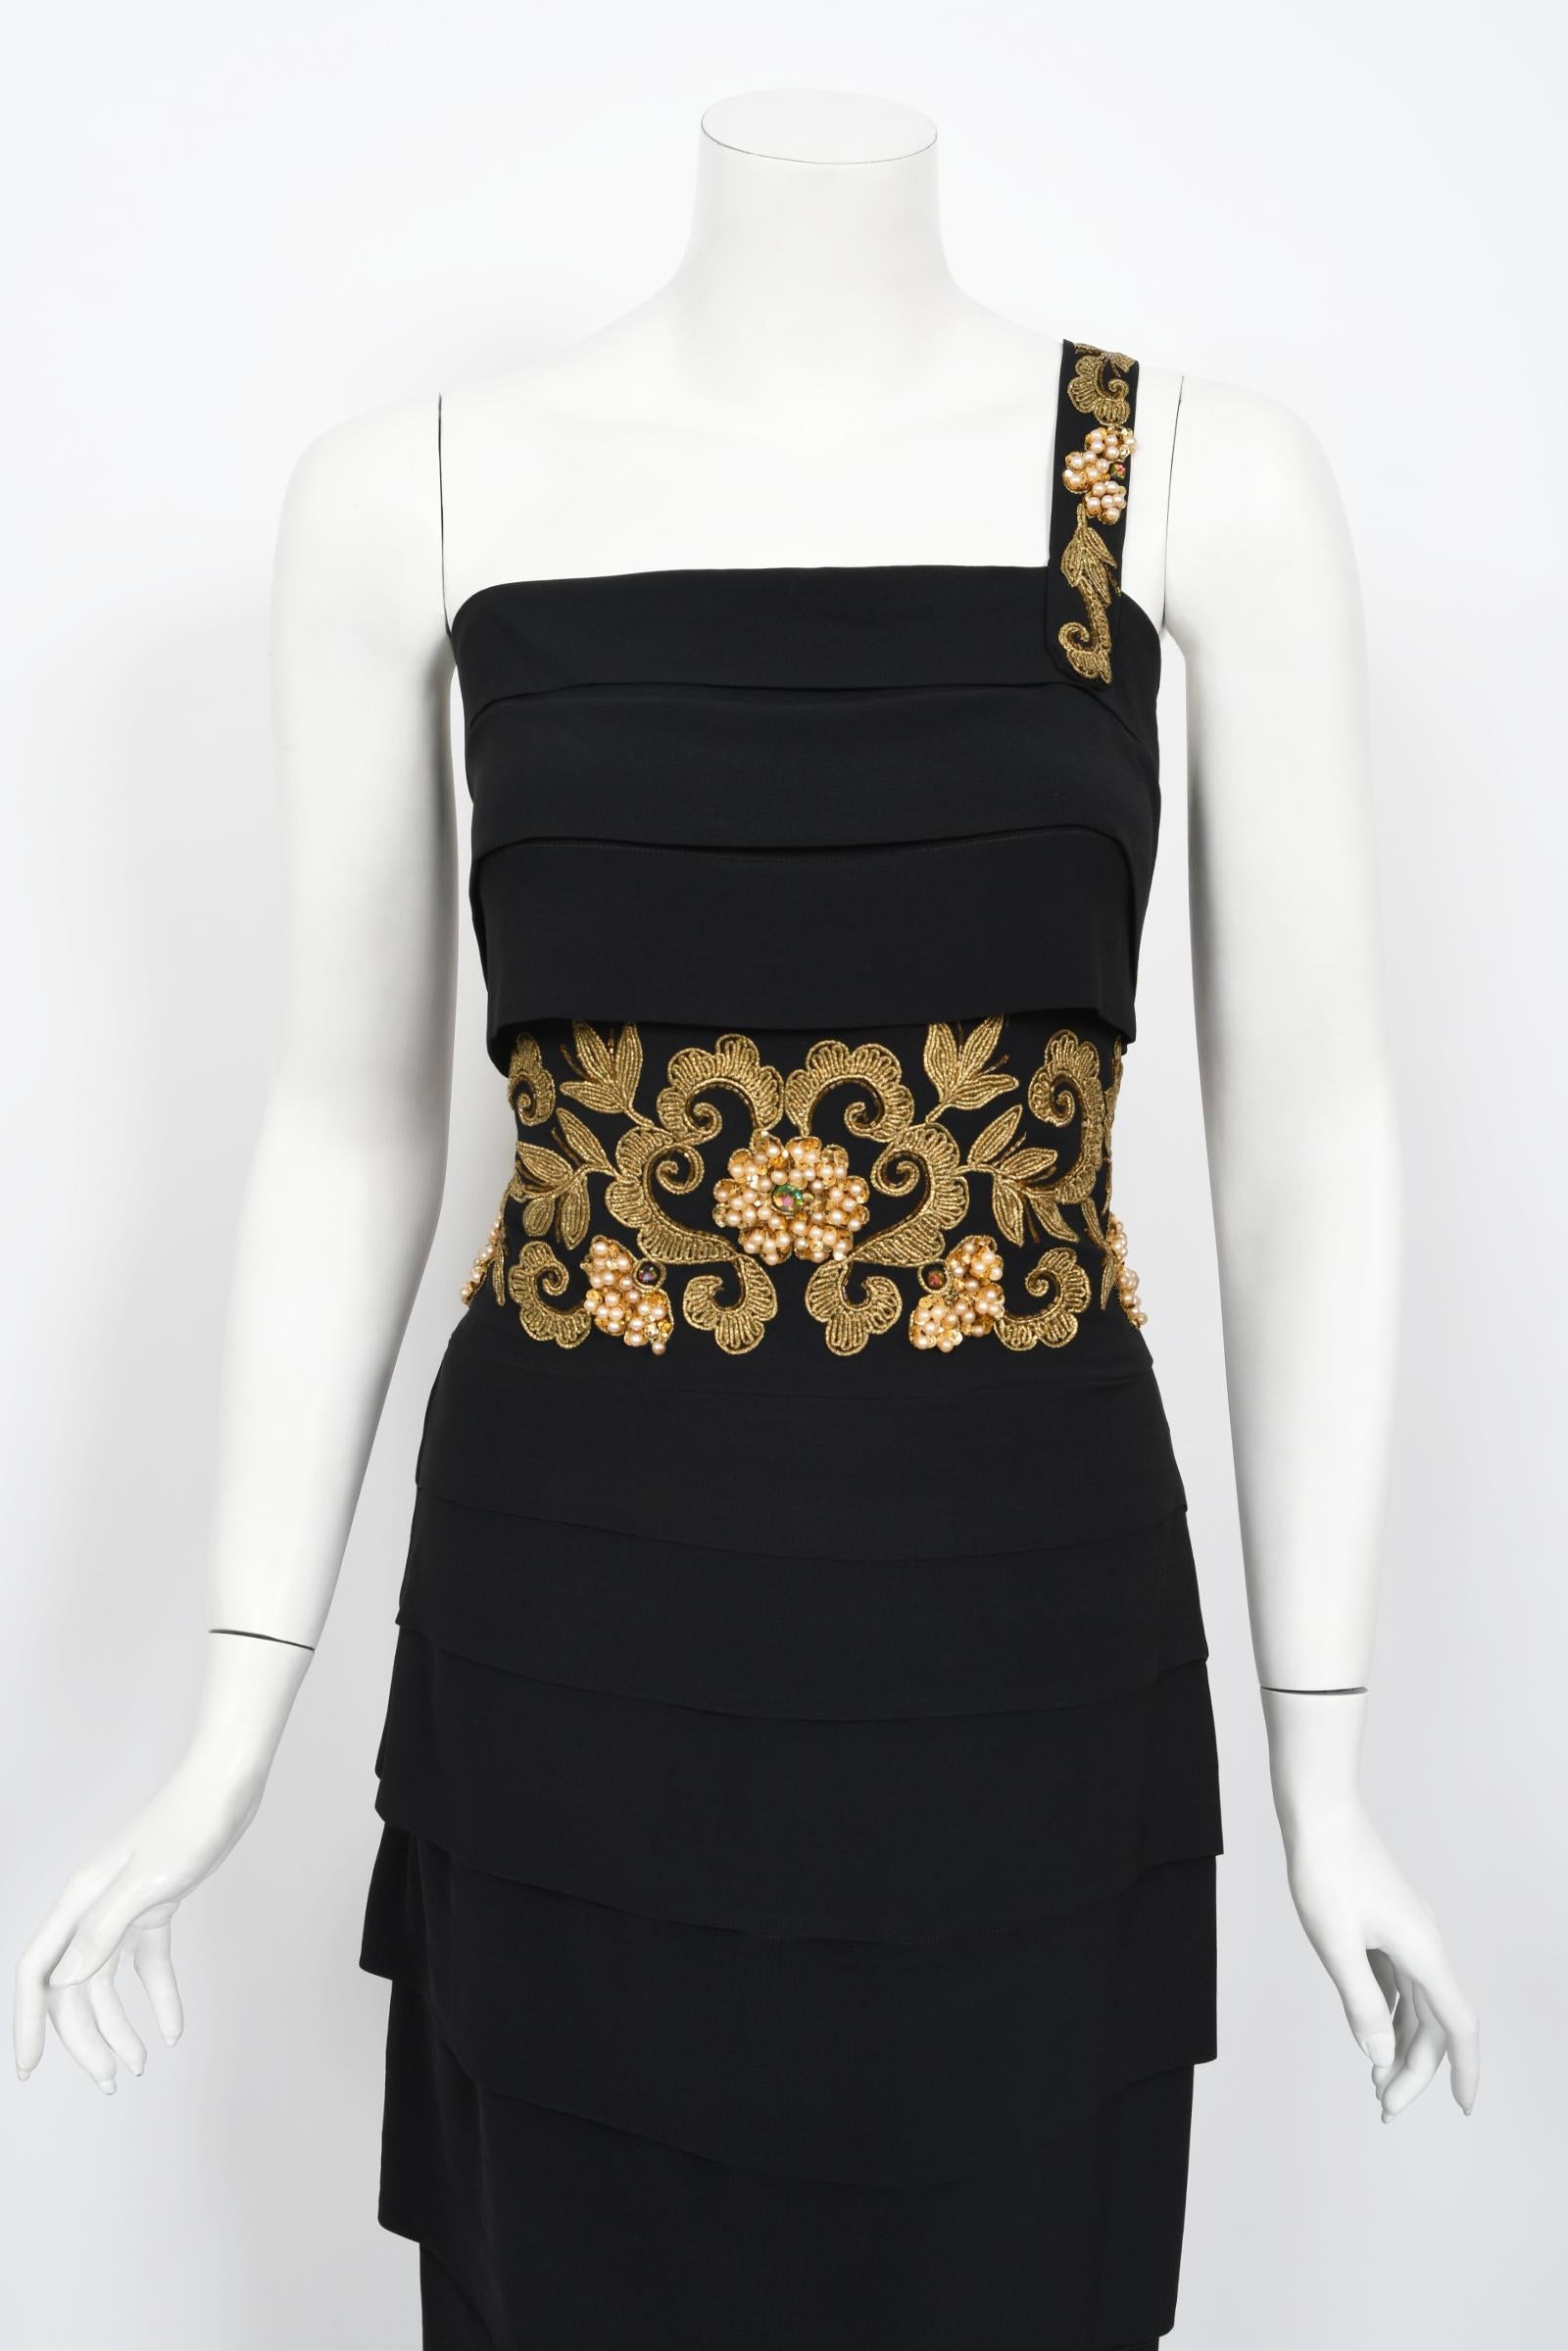 An absolutely stunning and highly coveted metallic gold embroidered and beaded black rayon crepe hourglass gown dating back to the 1940's Old Hollywood era of glamour. The bodice has a seductive asymmetric one-shoulder fitted design. The adornment